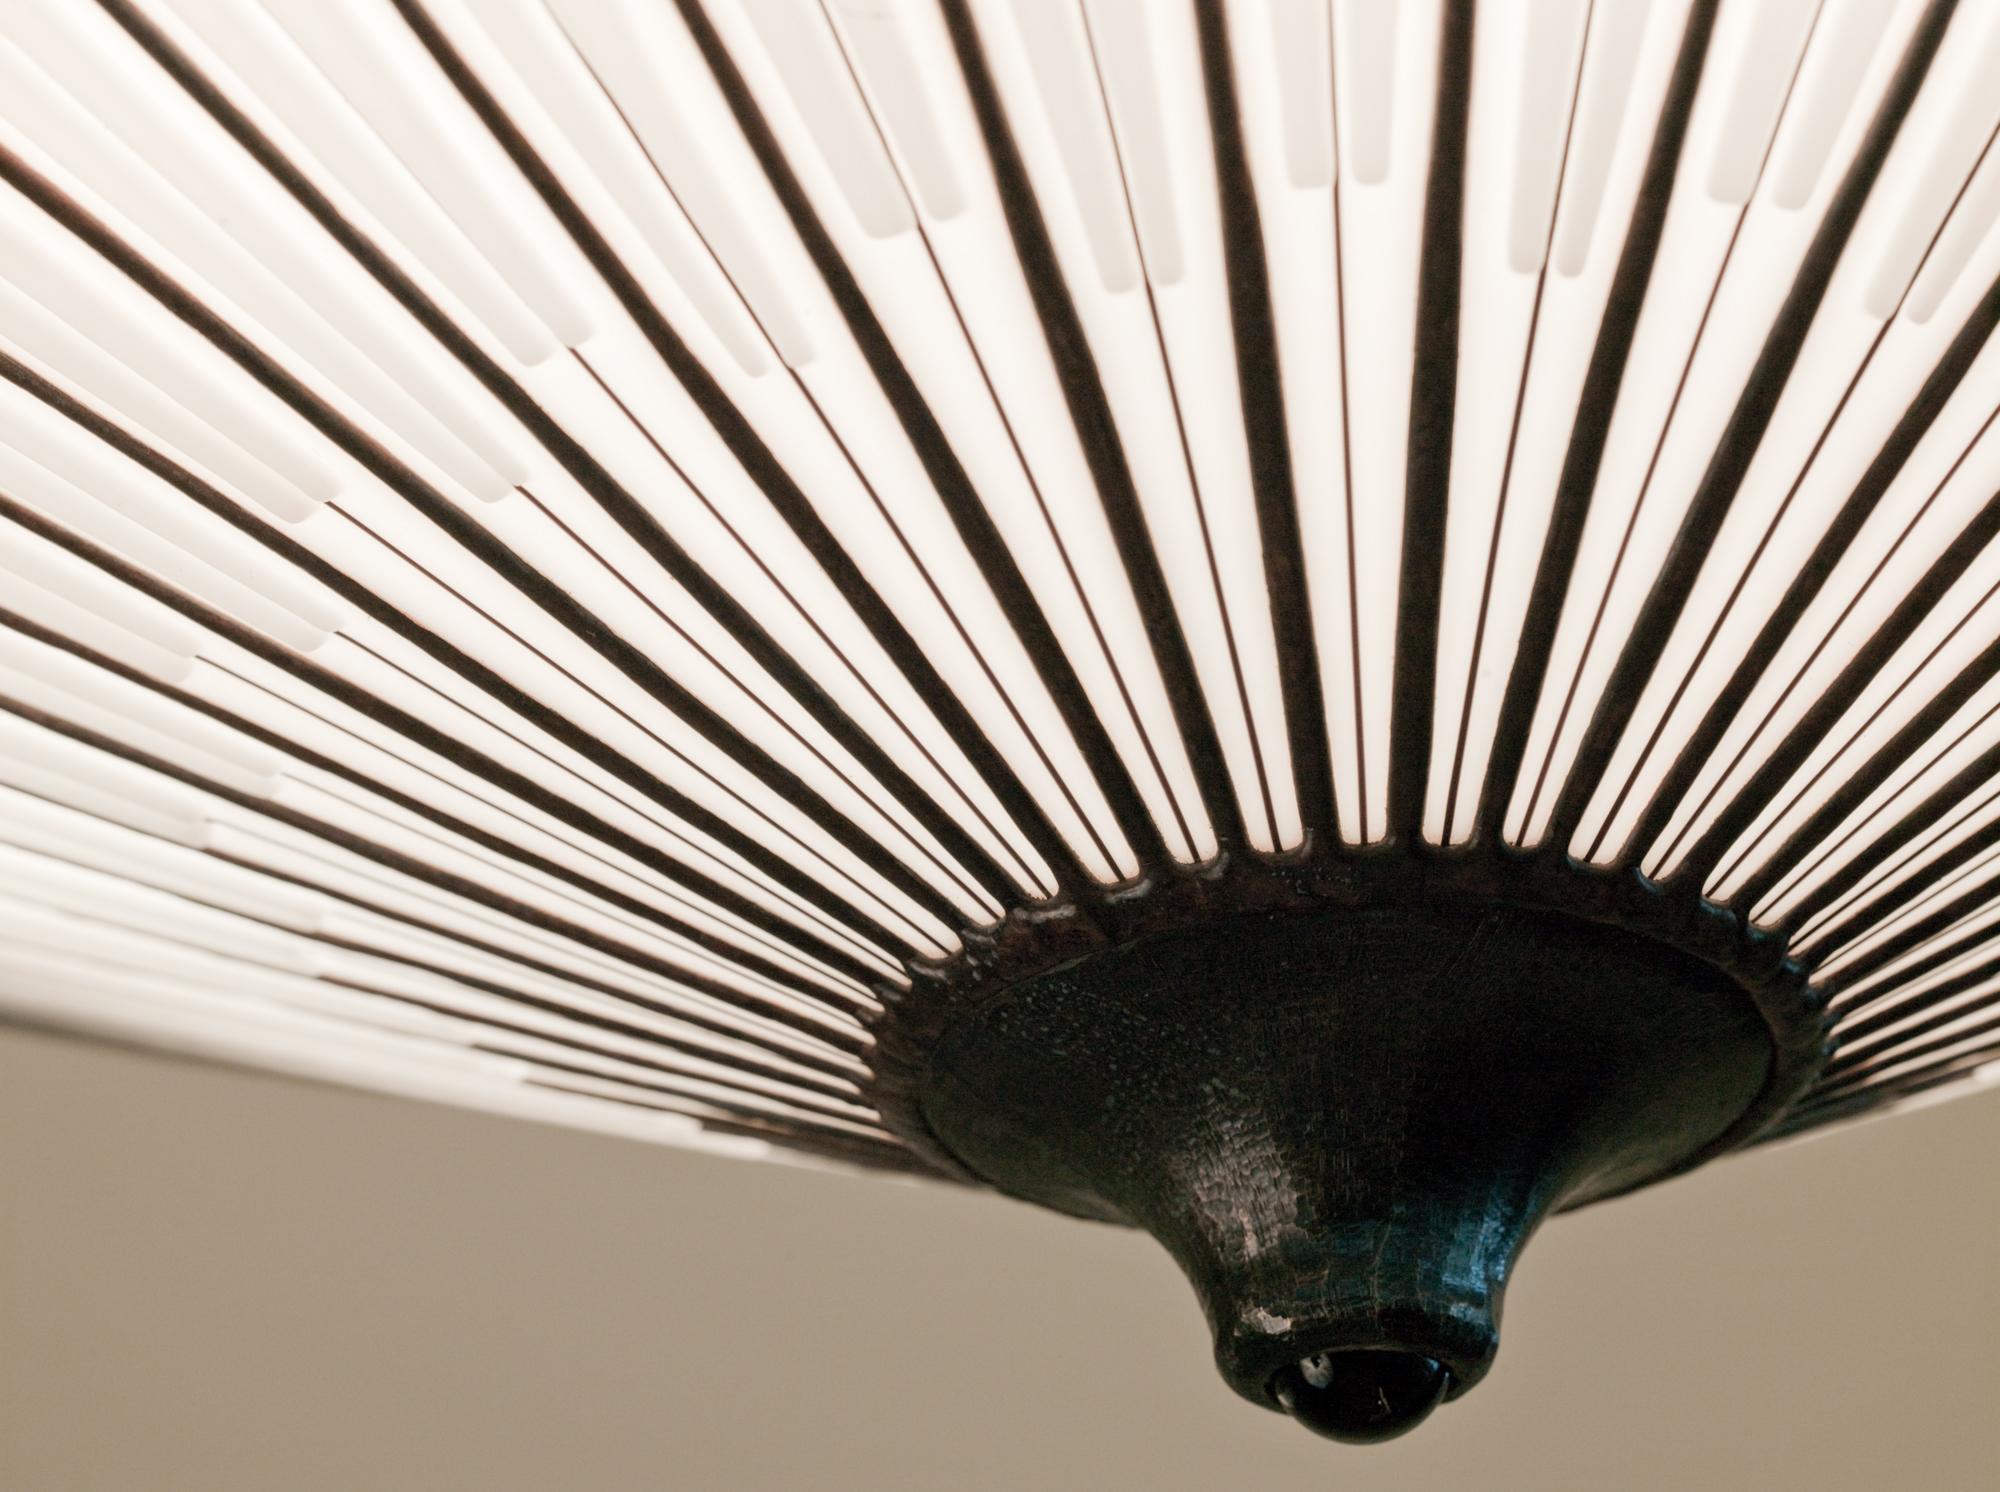 Founder Noel Hilliard was inspired to push both age old materials of glass and bronze into new and interesting forms. The Parasol pendant was designed by Noel in 2004. 
Since then the Parasol has been featured around the world in both commericial